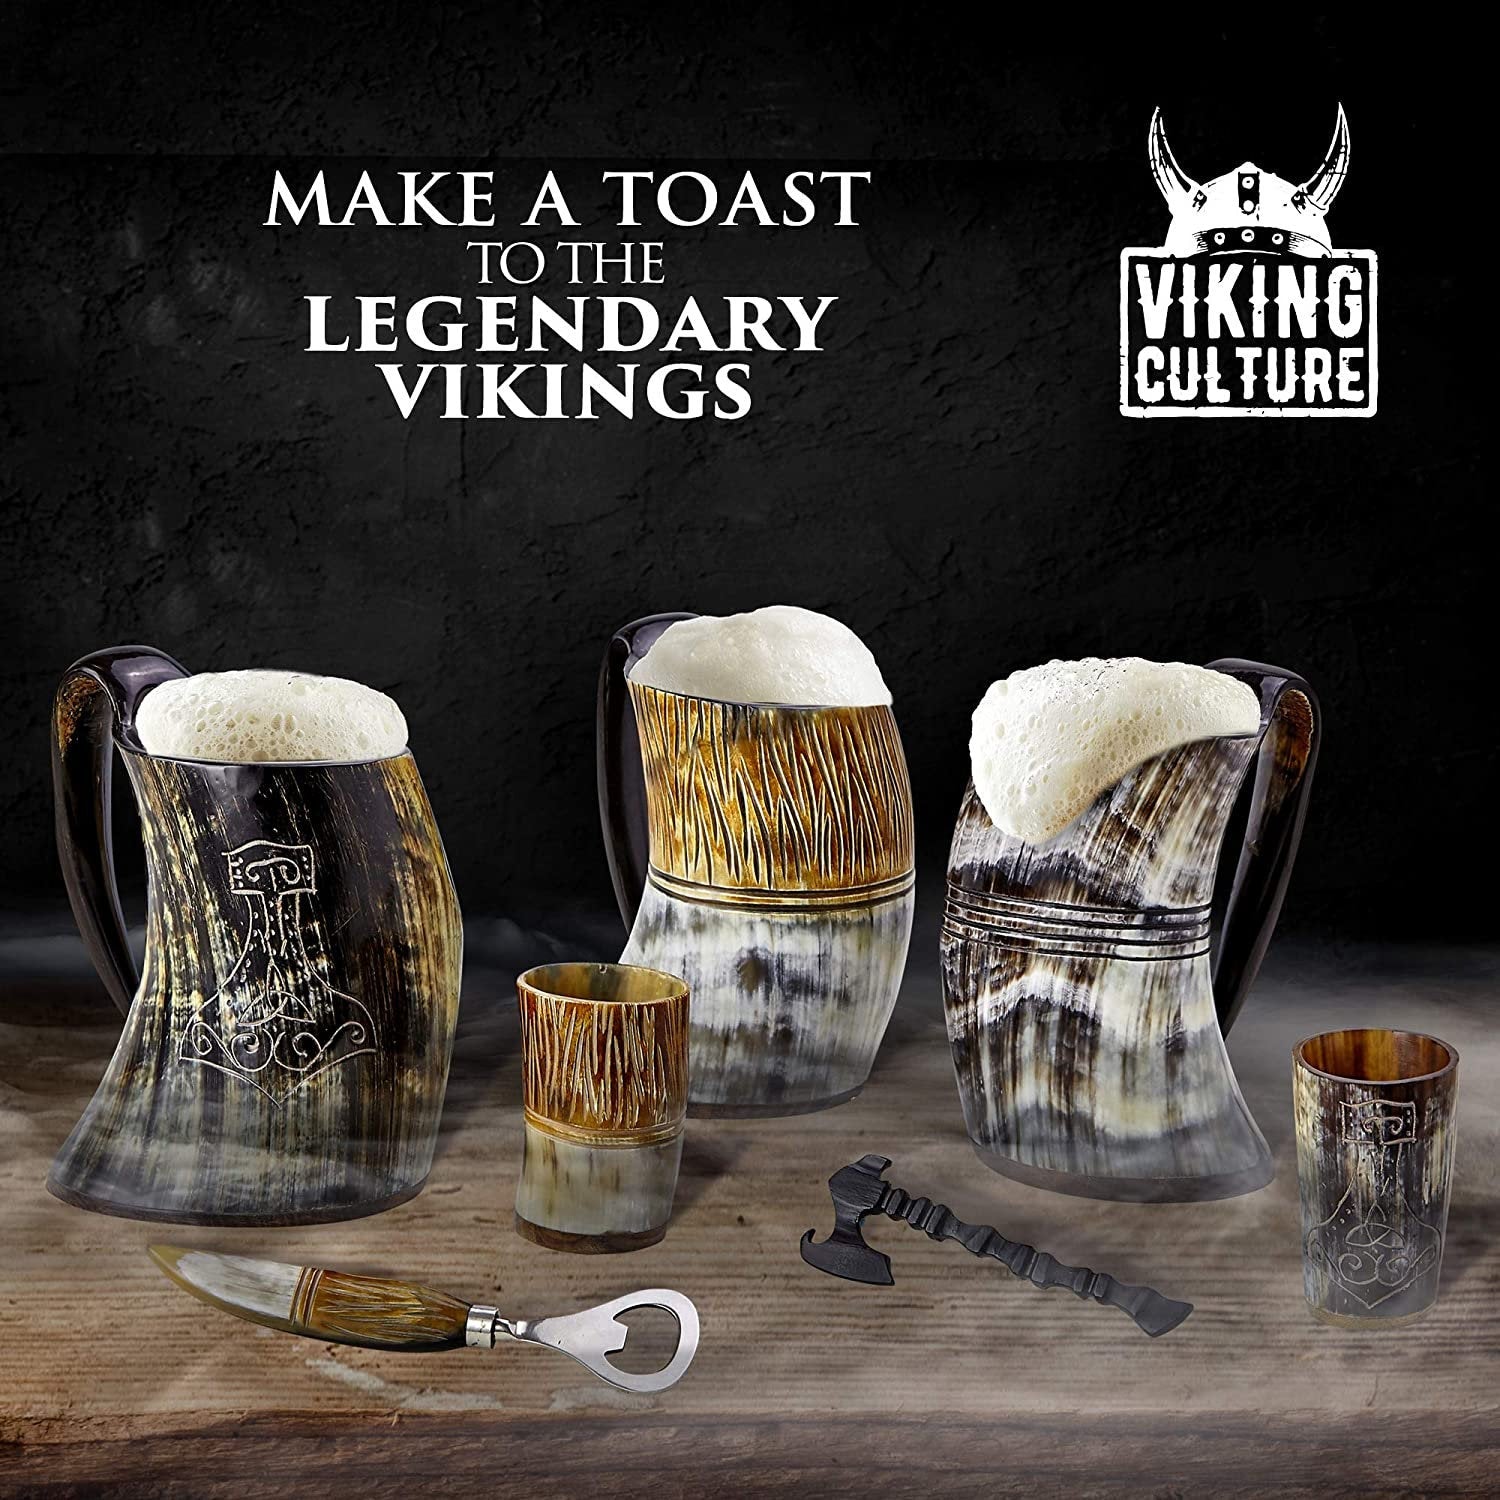 Viking Culture Ox Horn Mug, Shot Glass, and Bottle Opener (3 Pc. Set) Authentic 16-oz. Beer Tankard | Vintage Stein with Handle, The Jarl